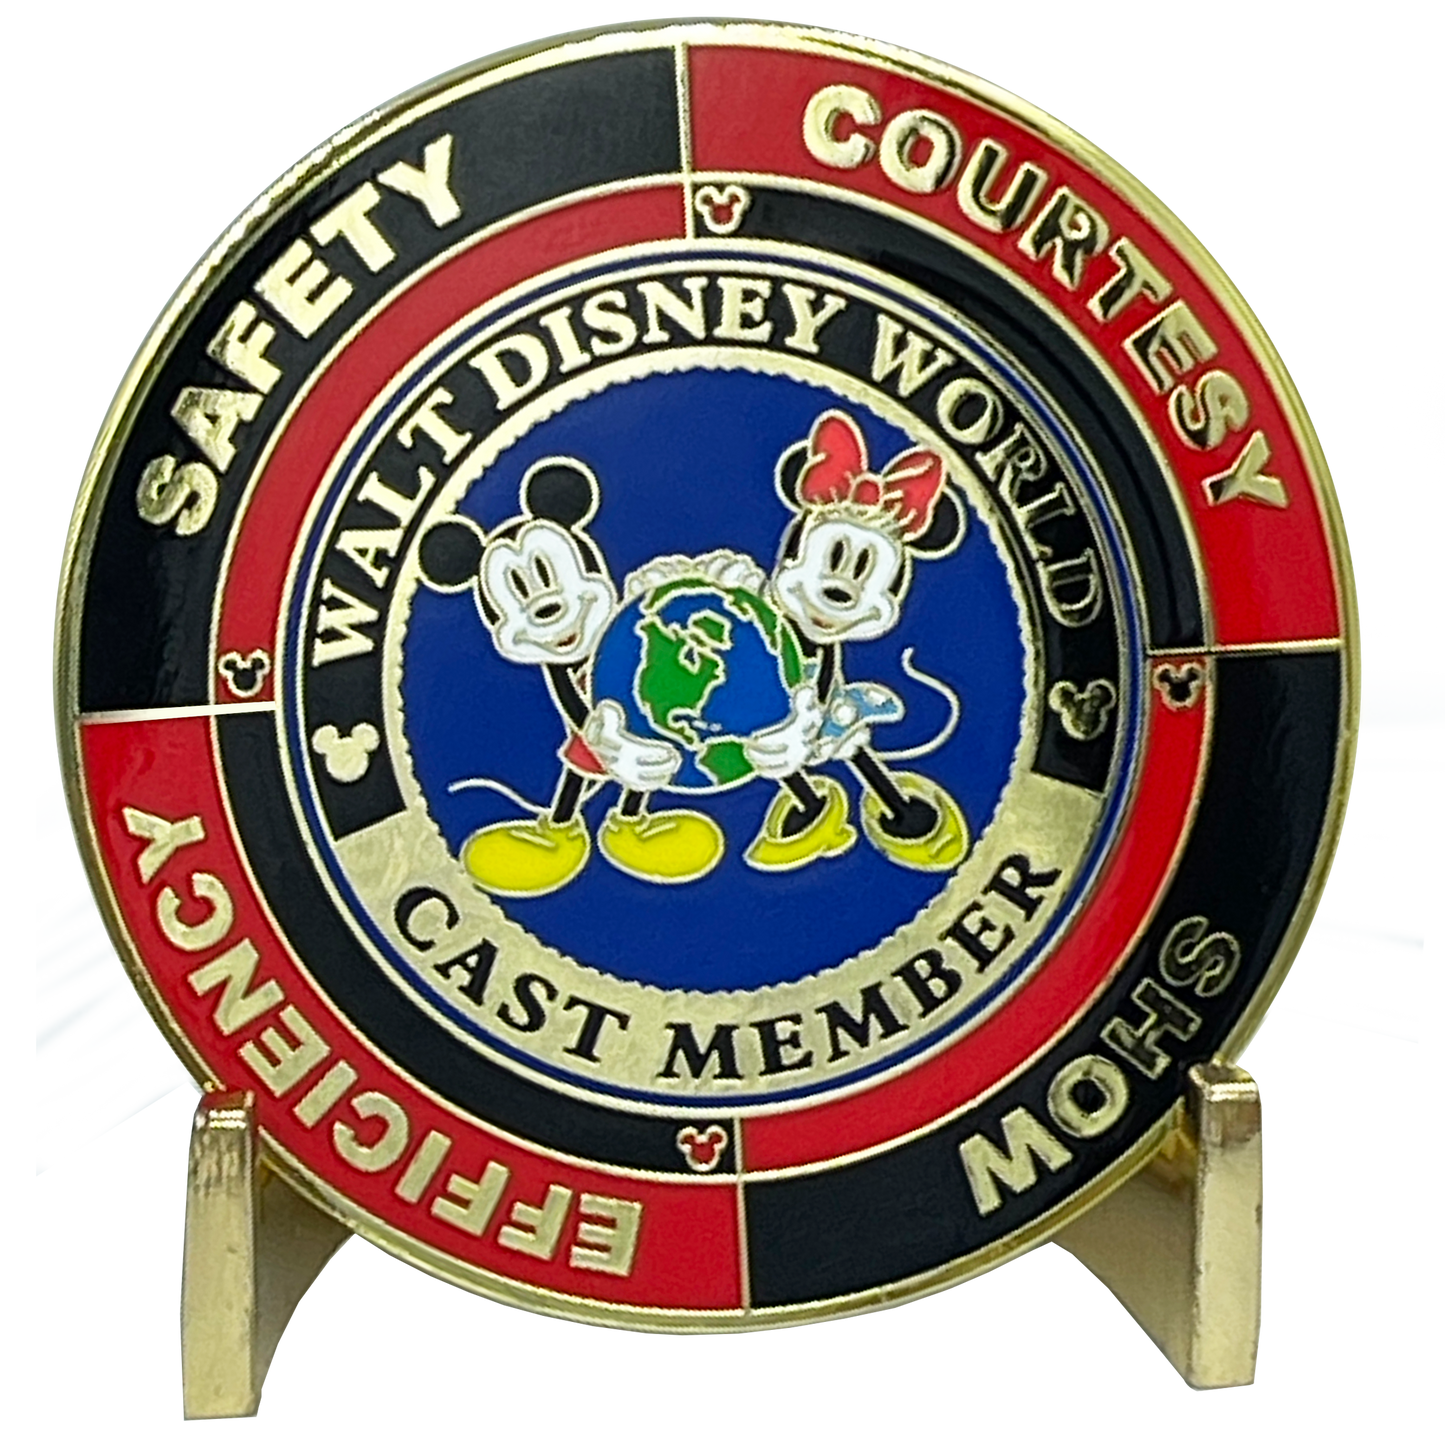 BL9-013 CREATING MAGIC Cast Member Challenge Coin